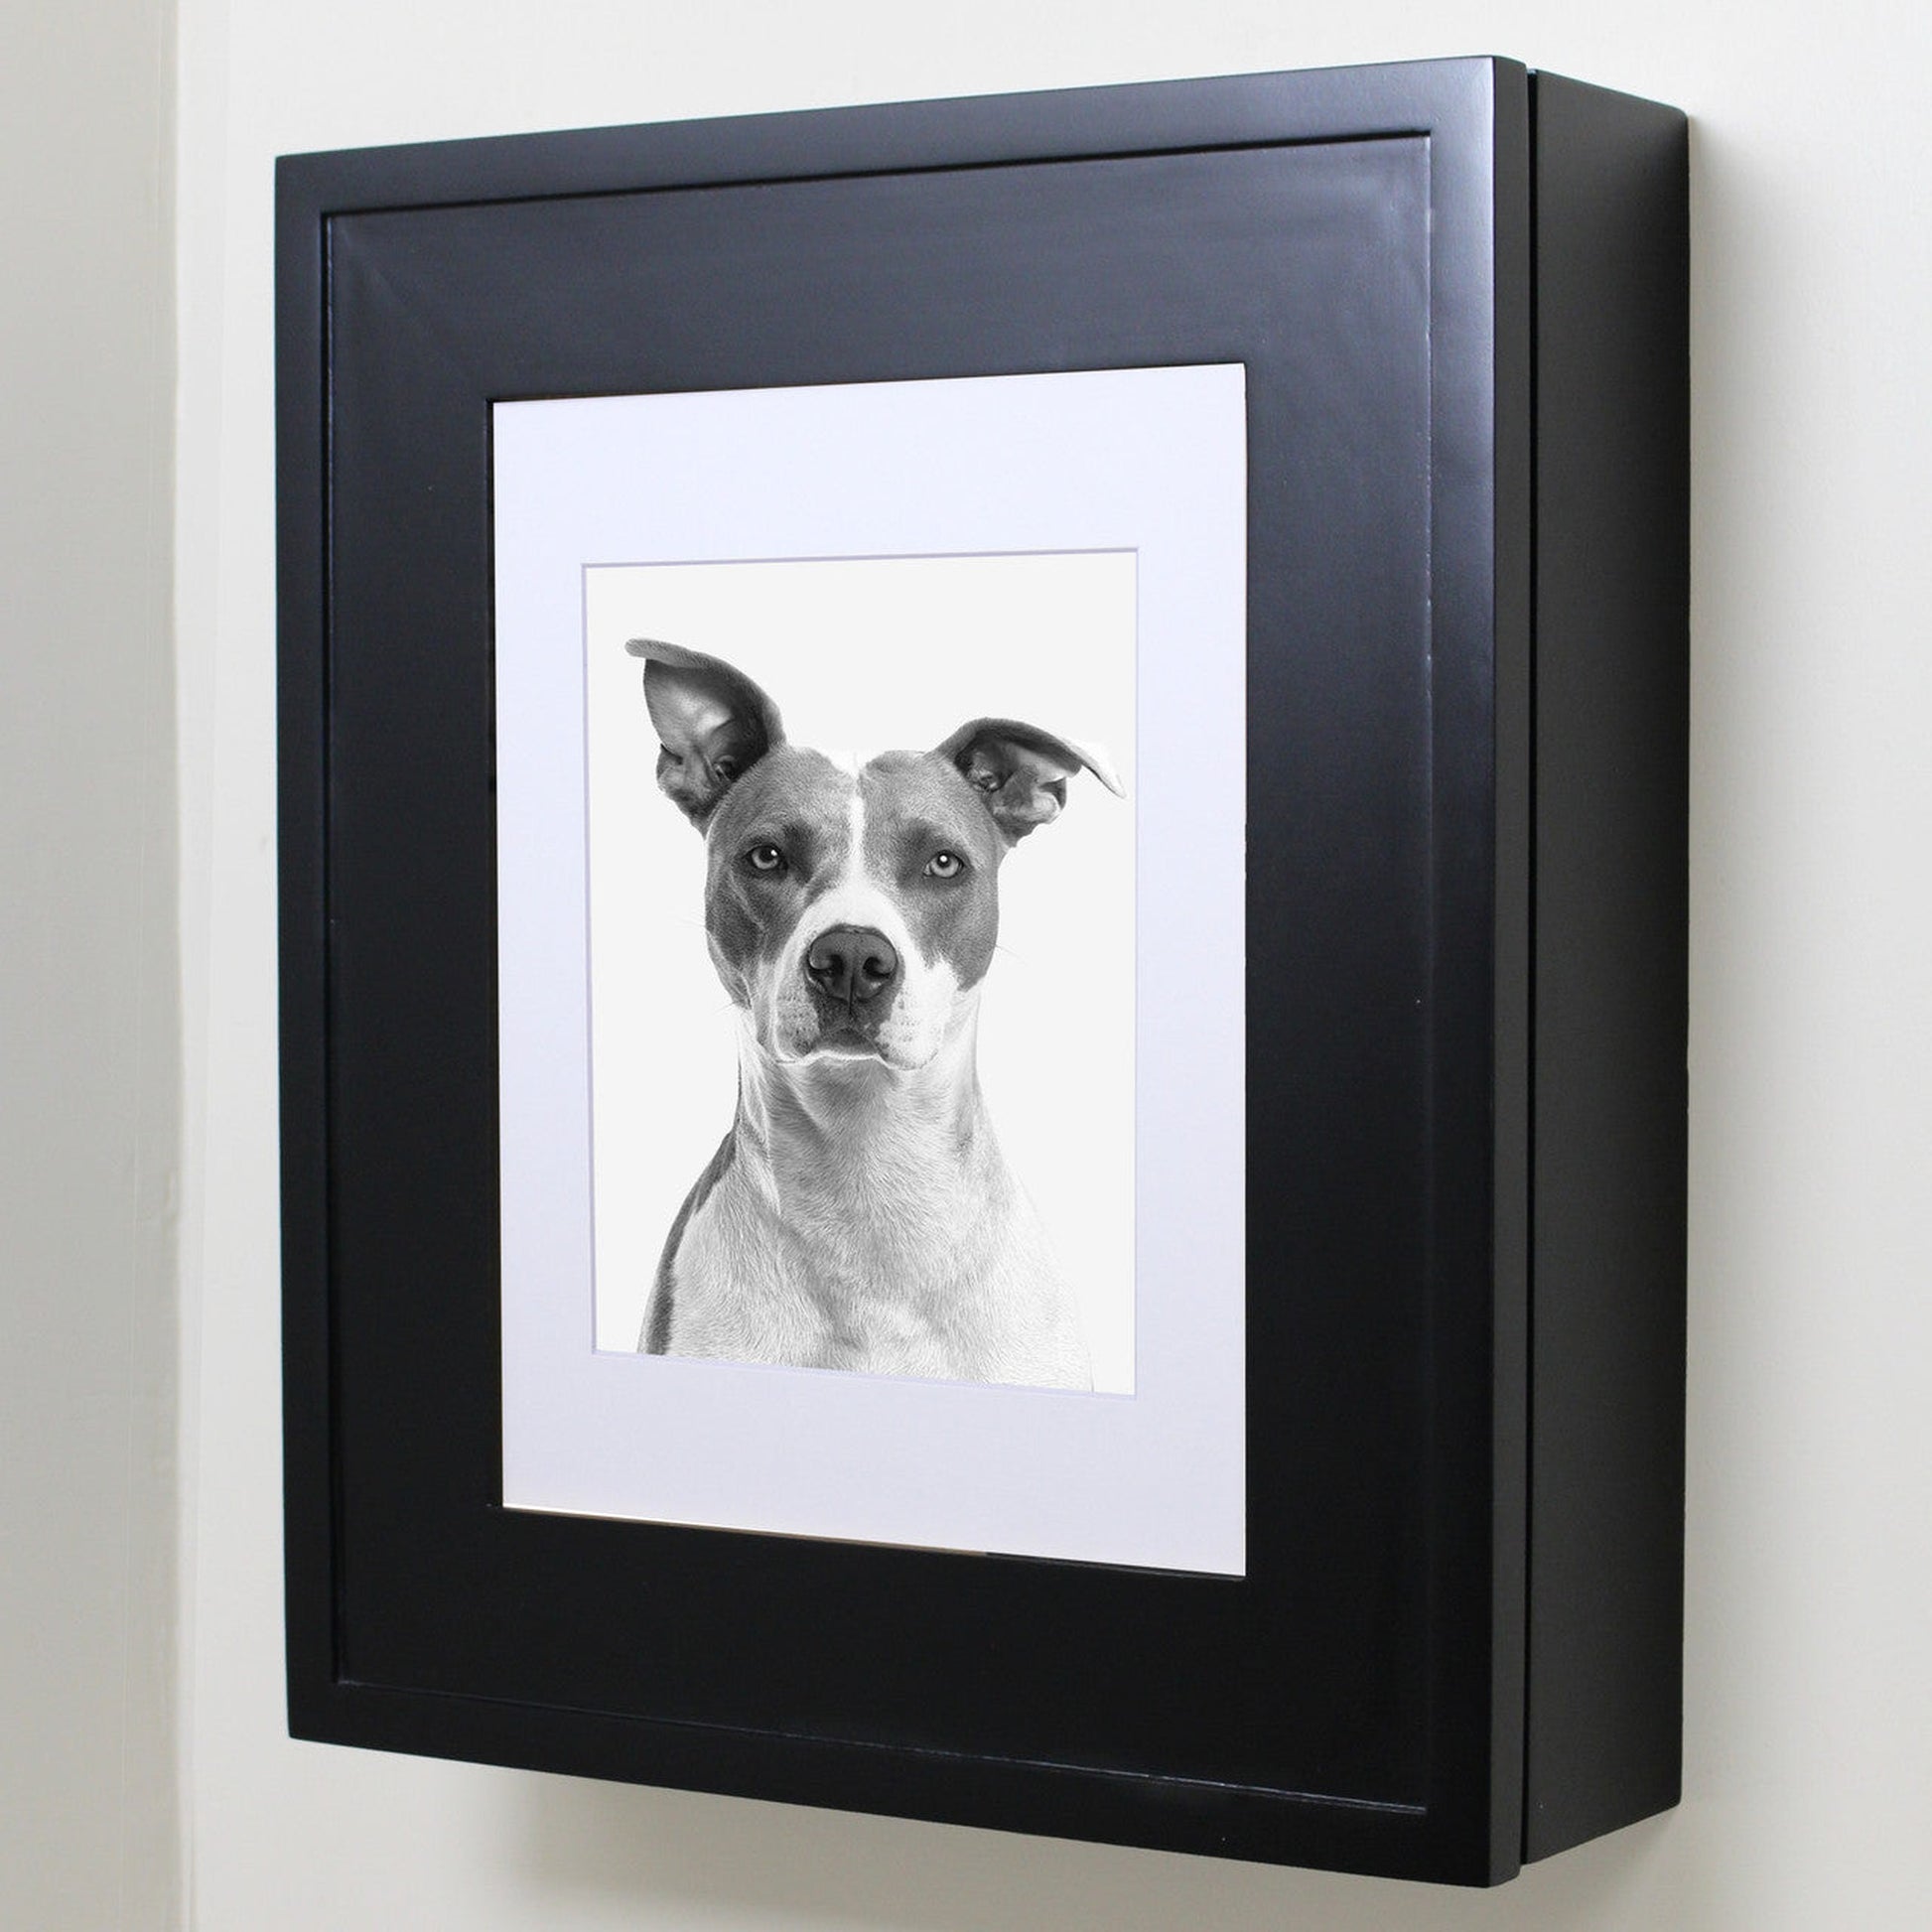 Fox Hollow Furnishings 20" x 17" Black Wall Mount Picture Frame Medicine Cabinet